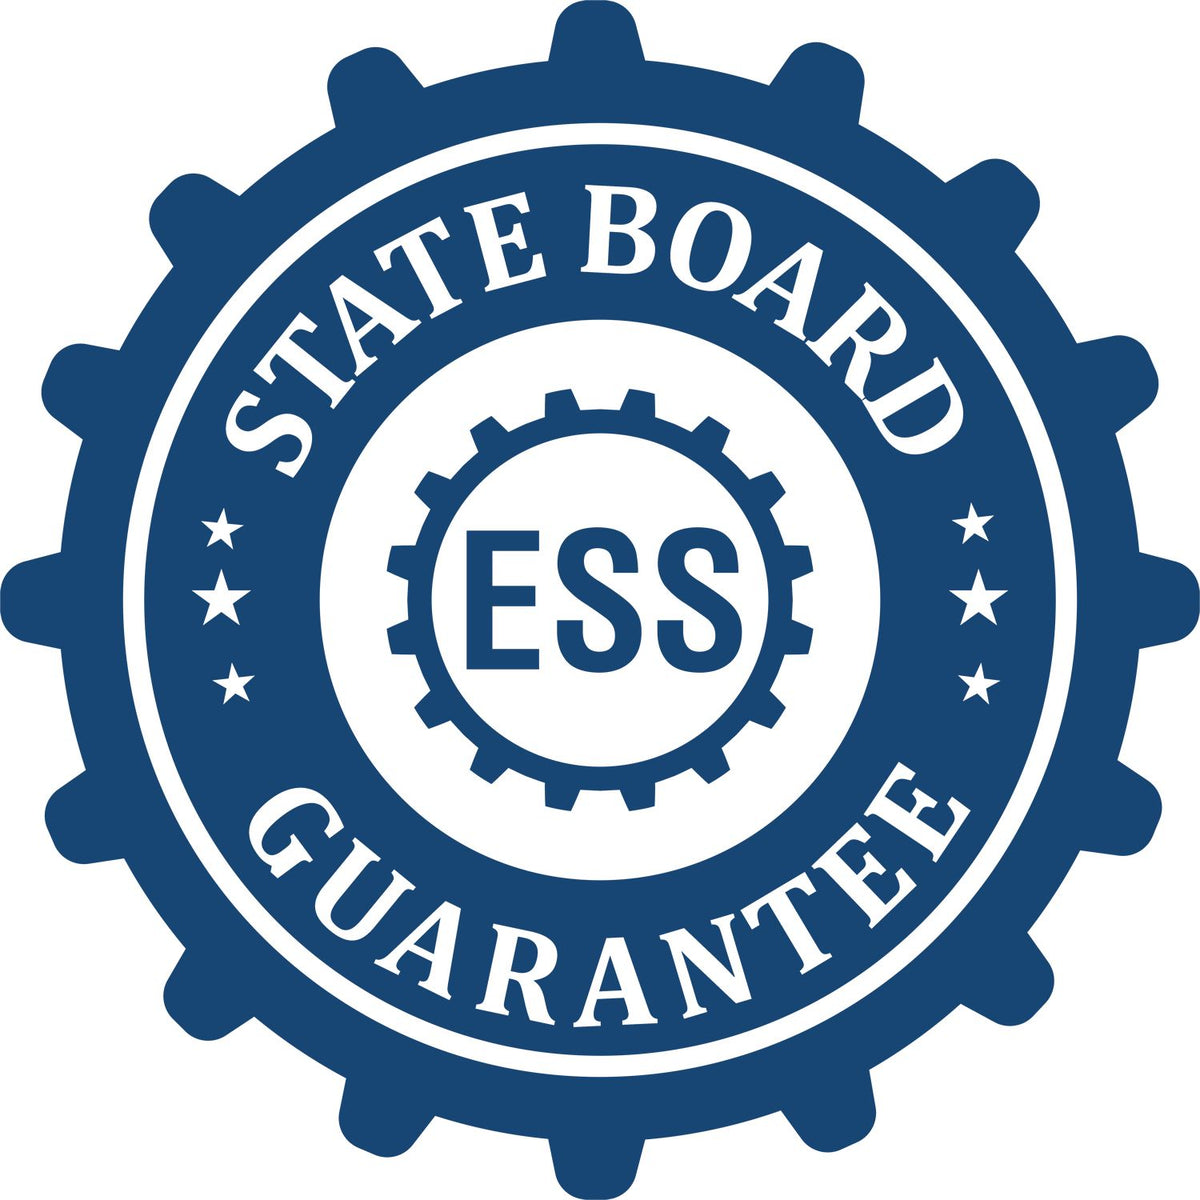 An emblem in a gear shape illustrating a state board guarantee for the Hybrid Missouri Land Surveyor Seal